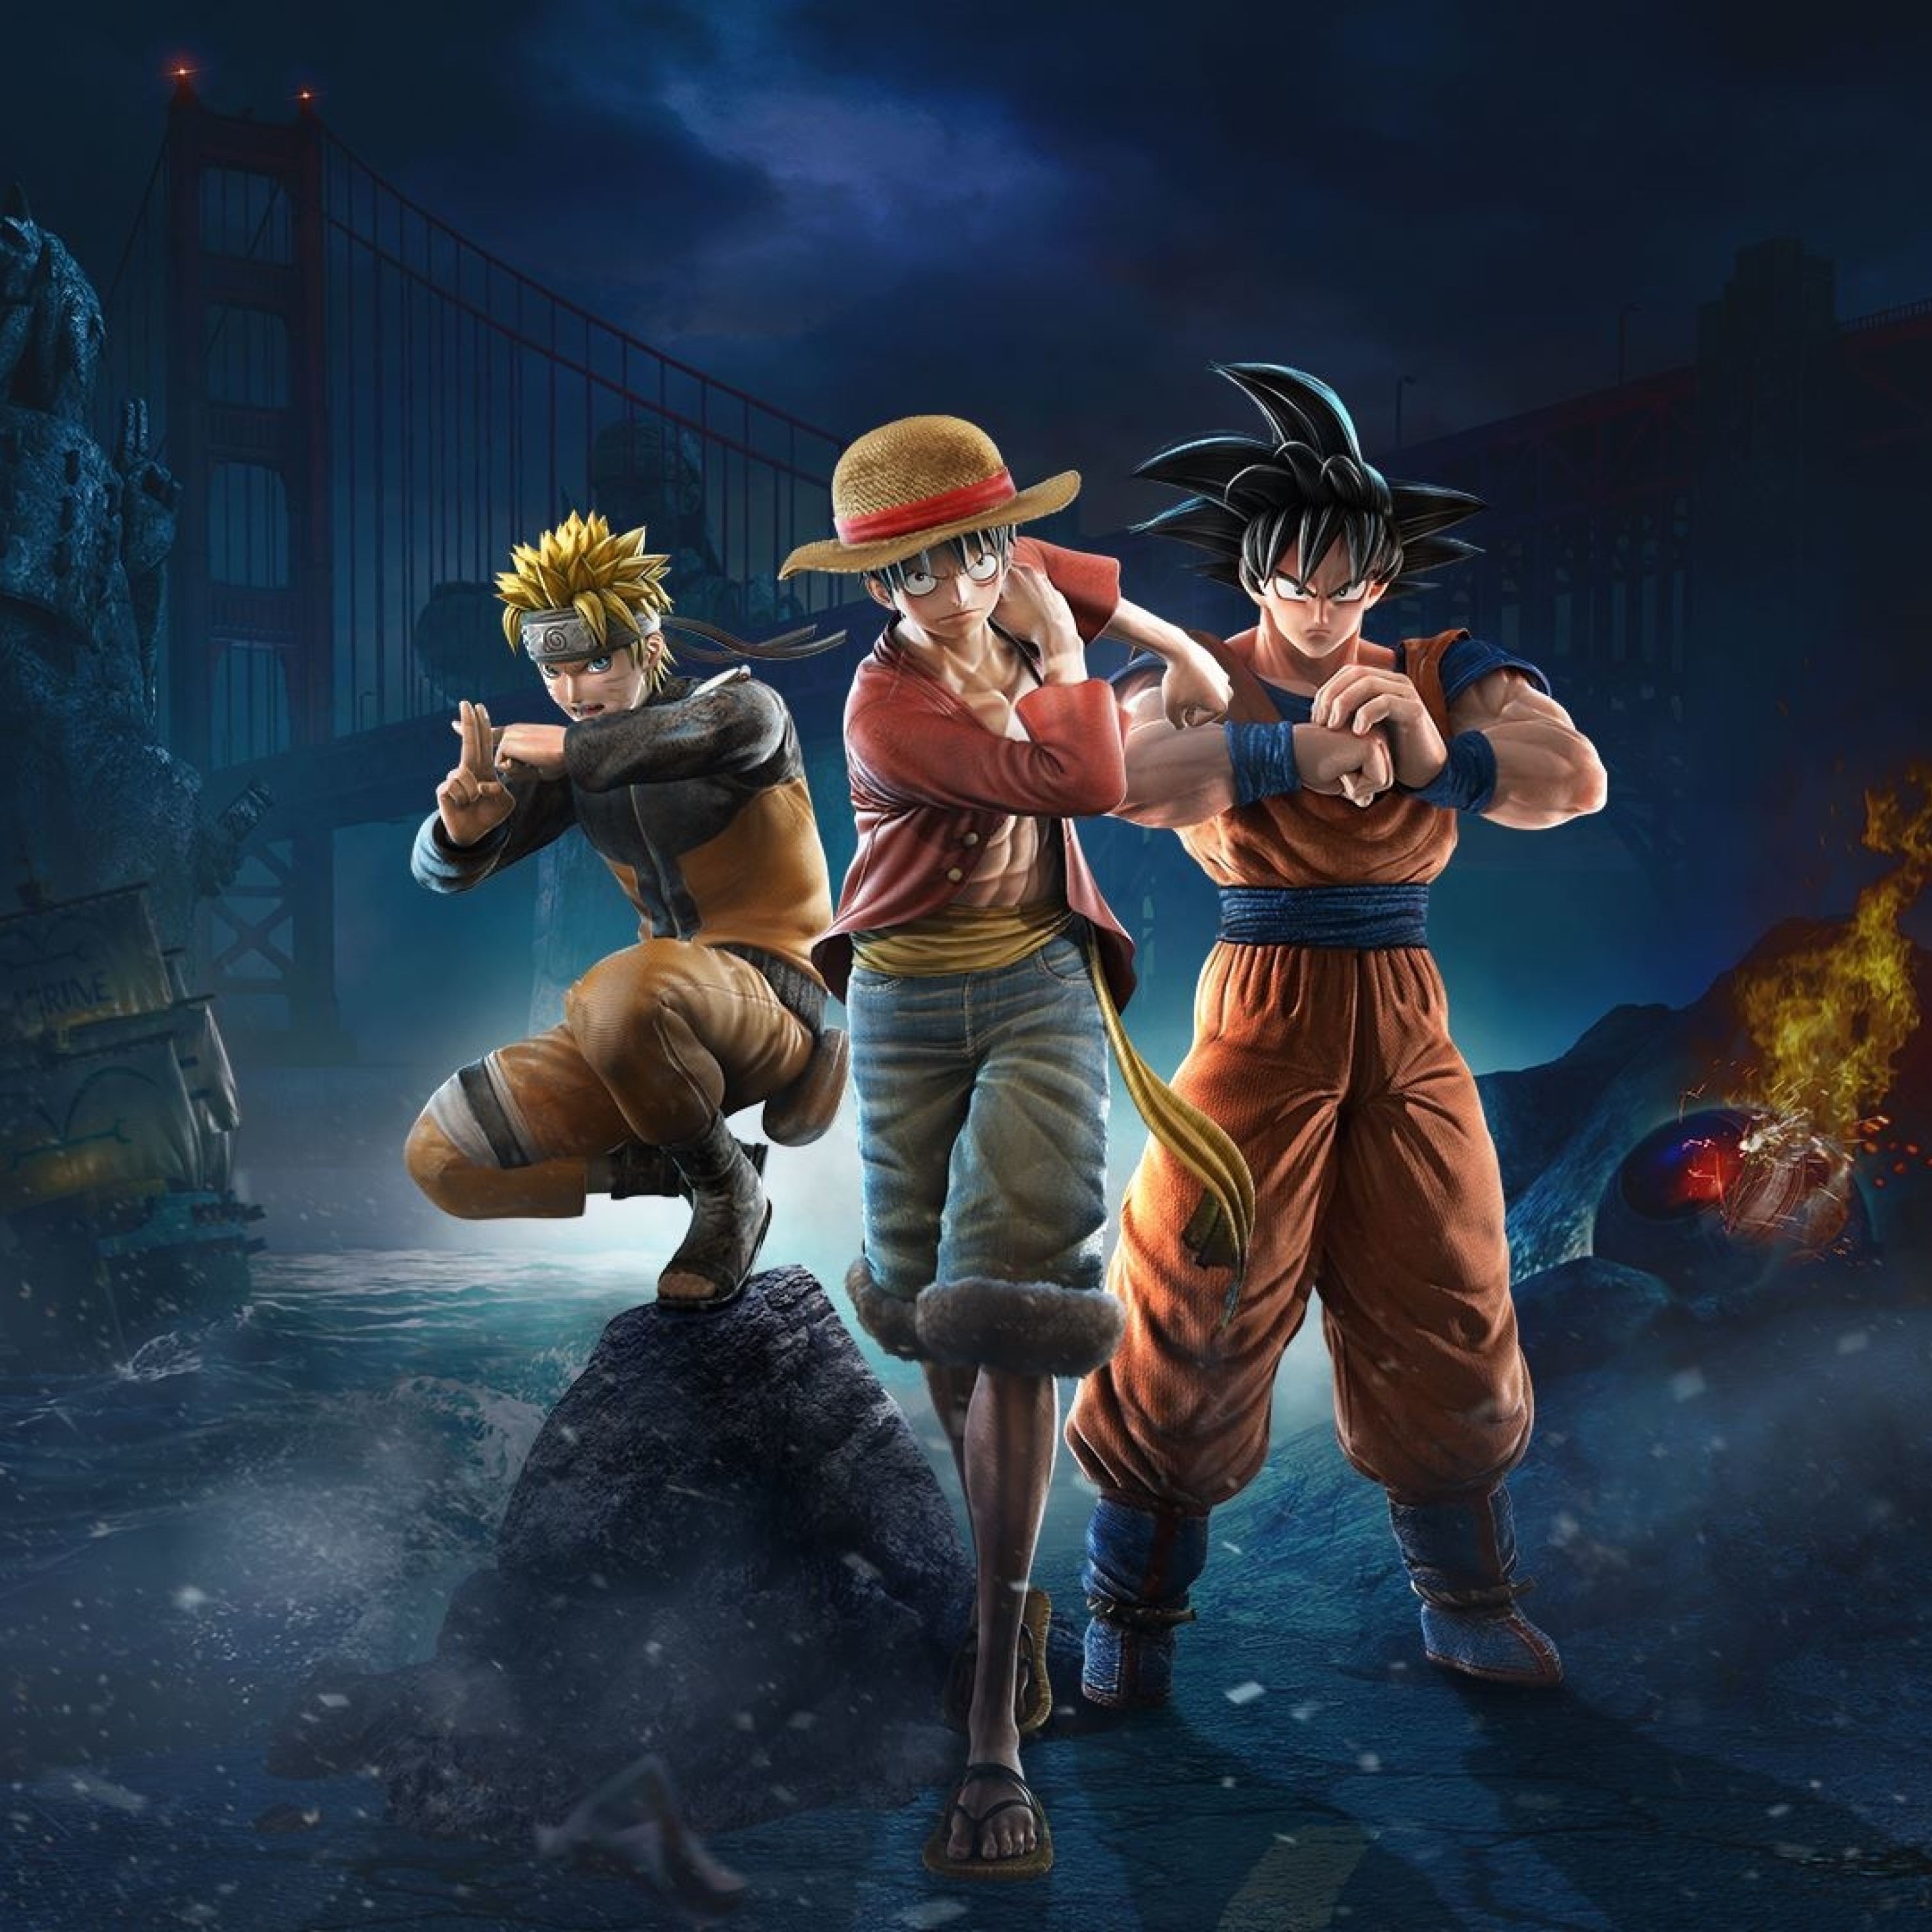 download jump force mods